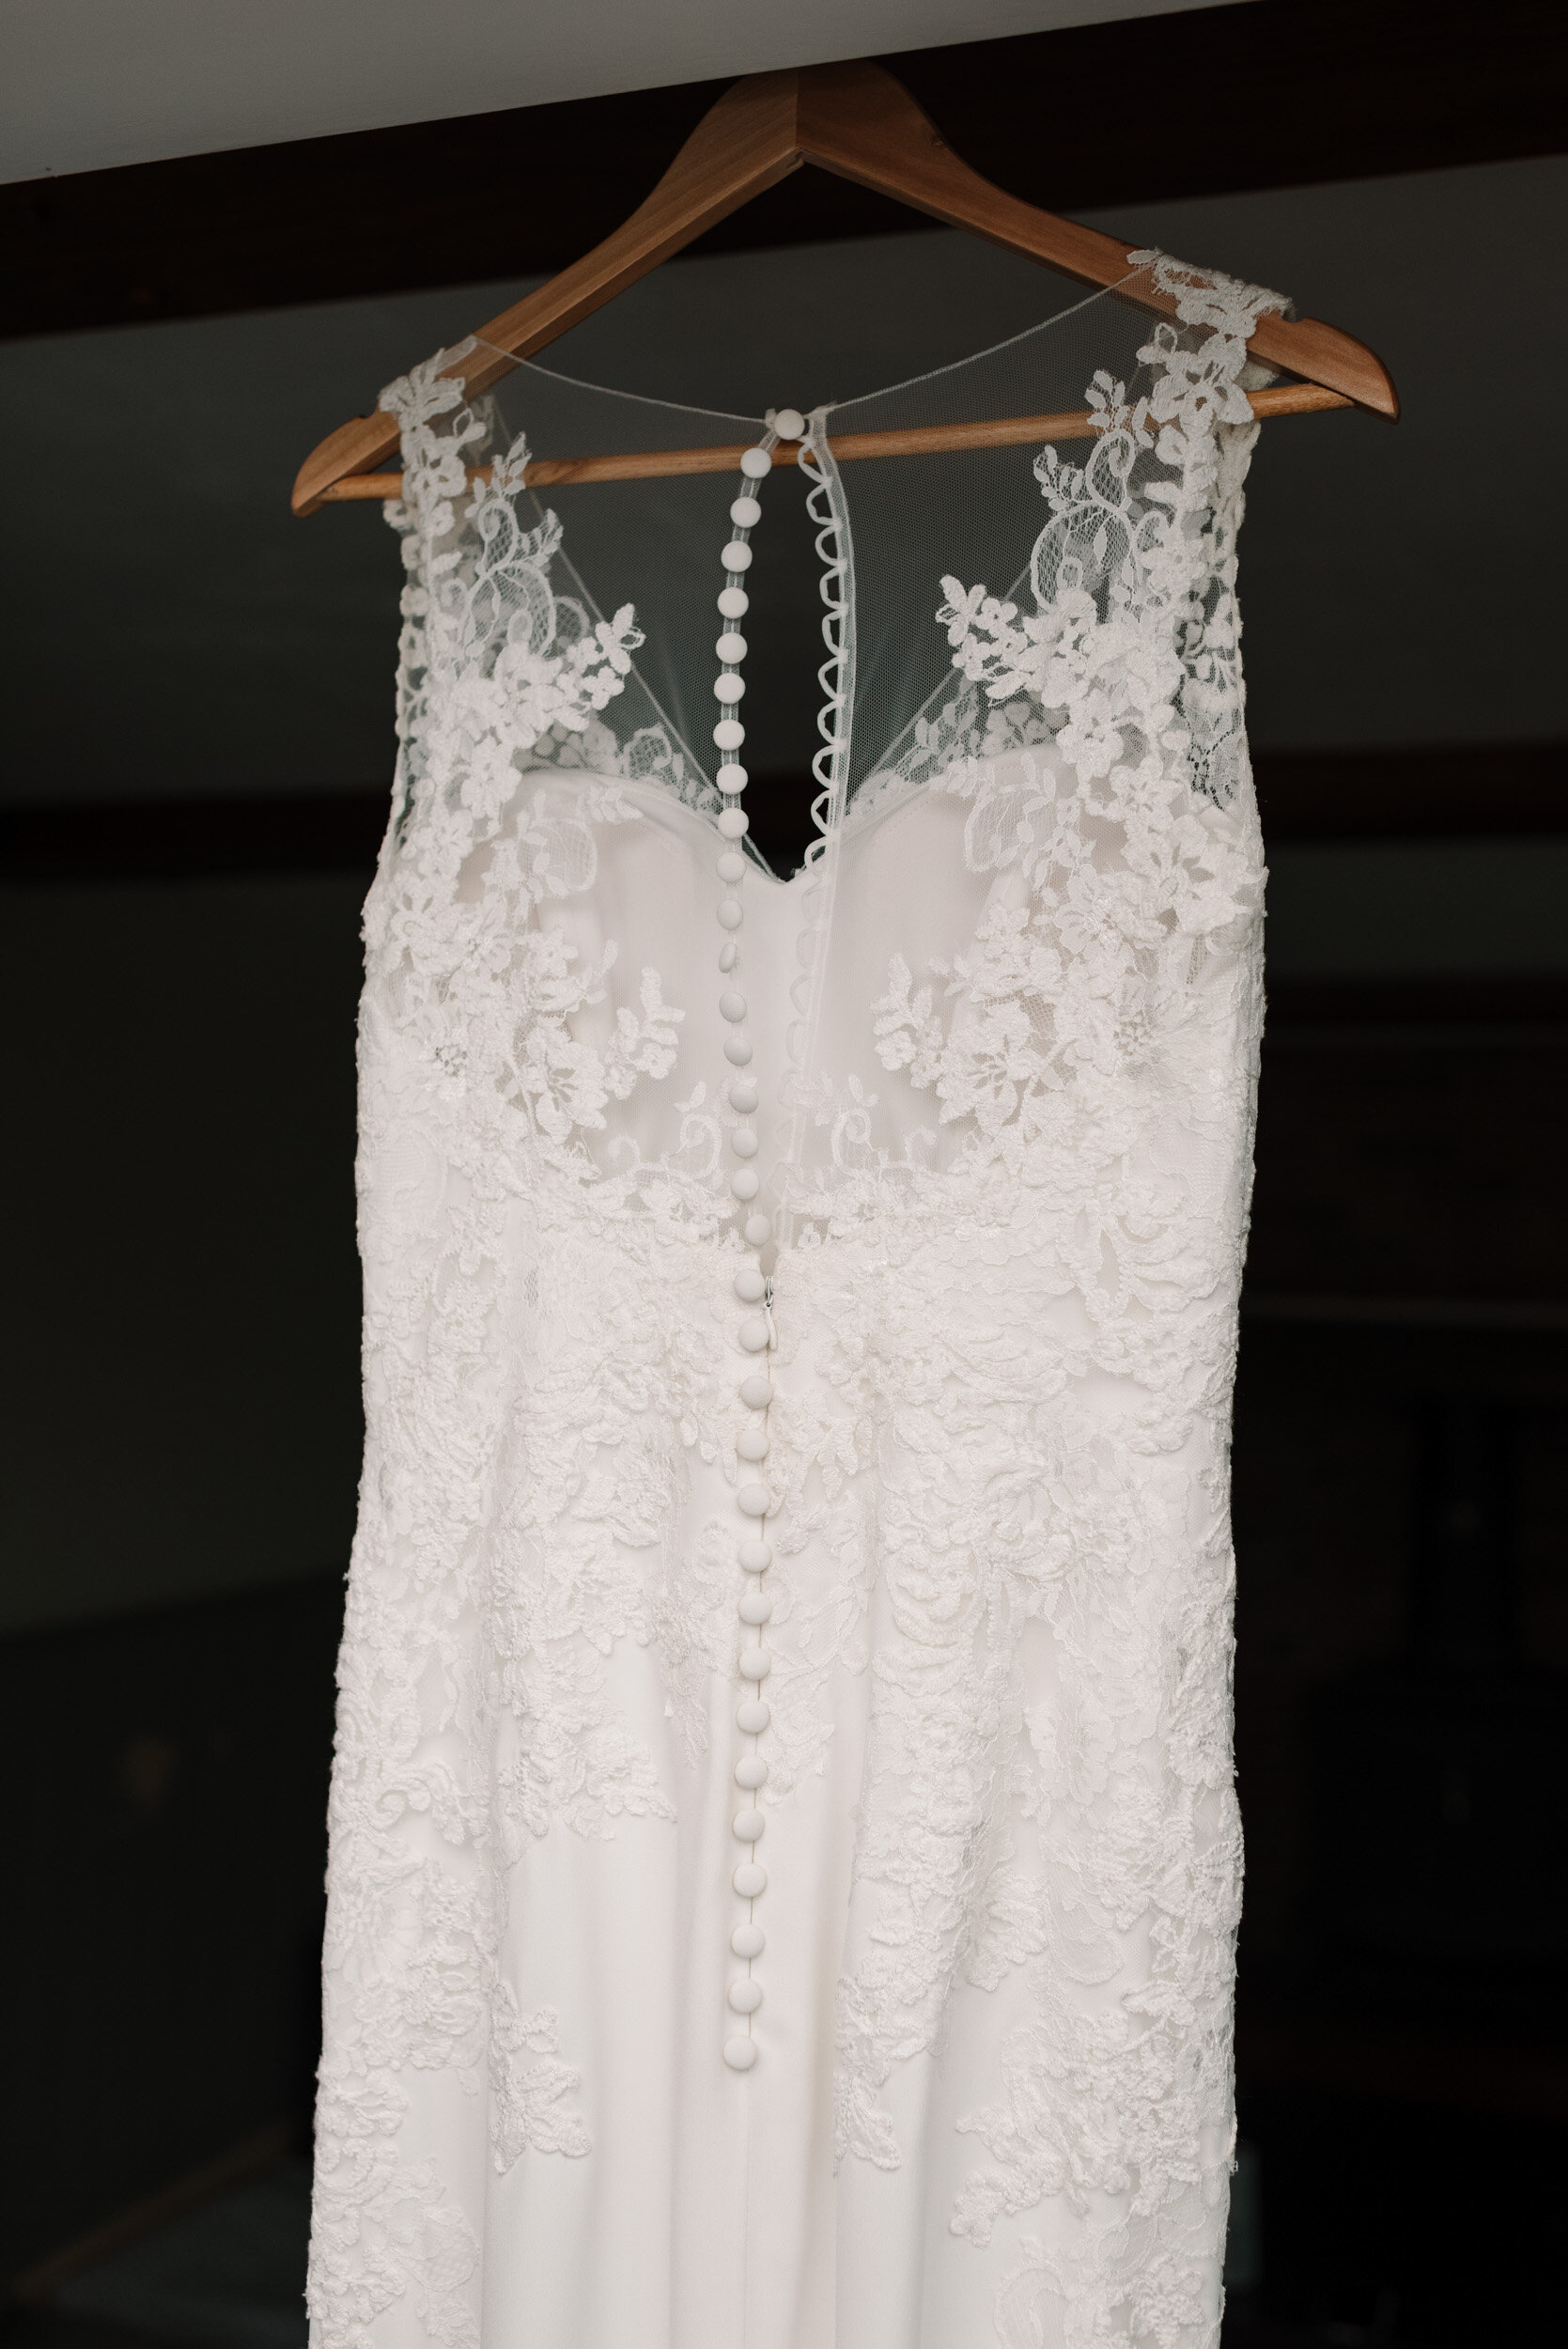 Bride's white dress with lace and small buttons, hanging from doorframe